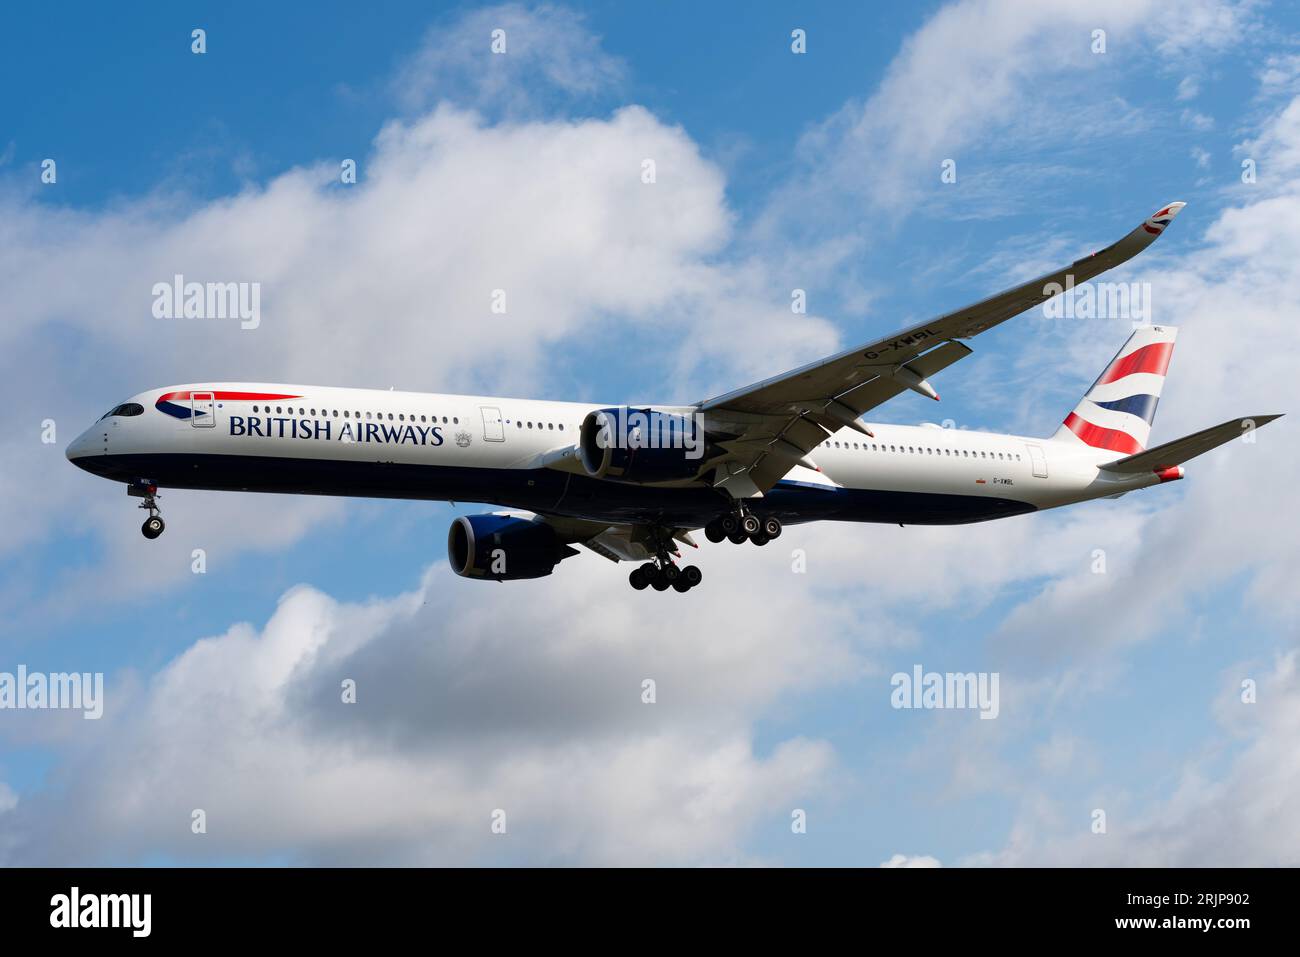 British Airways Airbus A350-1041 jet airliner plane G-XWBL on finals to land at London Heathrow Airport, UK. BA, part of International Airlines Group Stock Photo